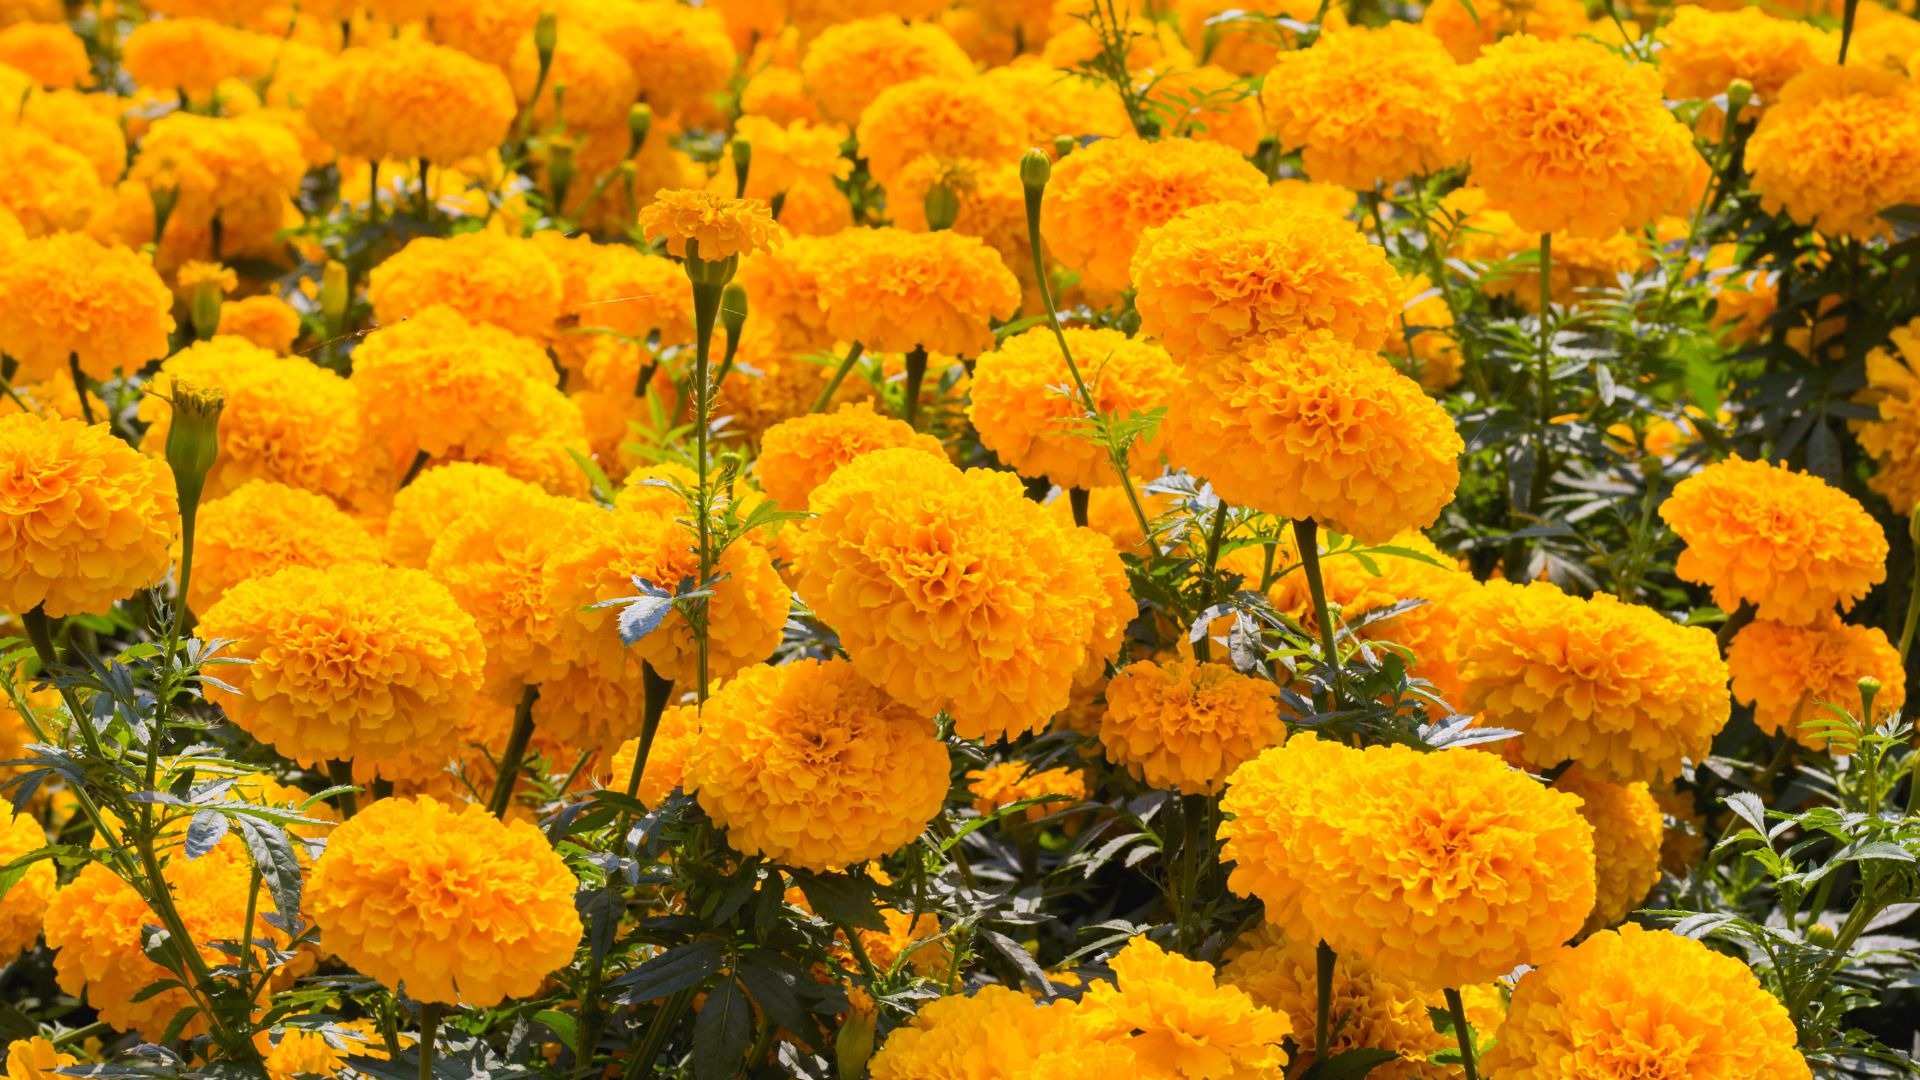 facts about marigolds